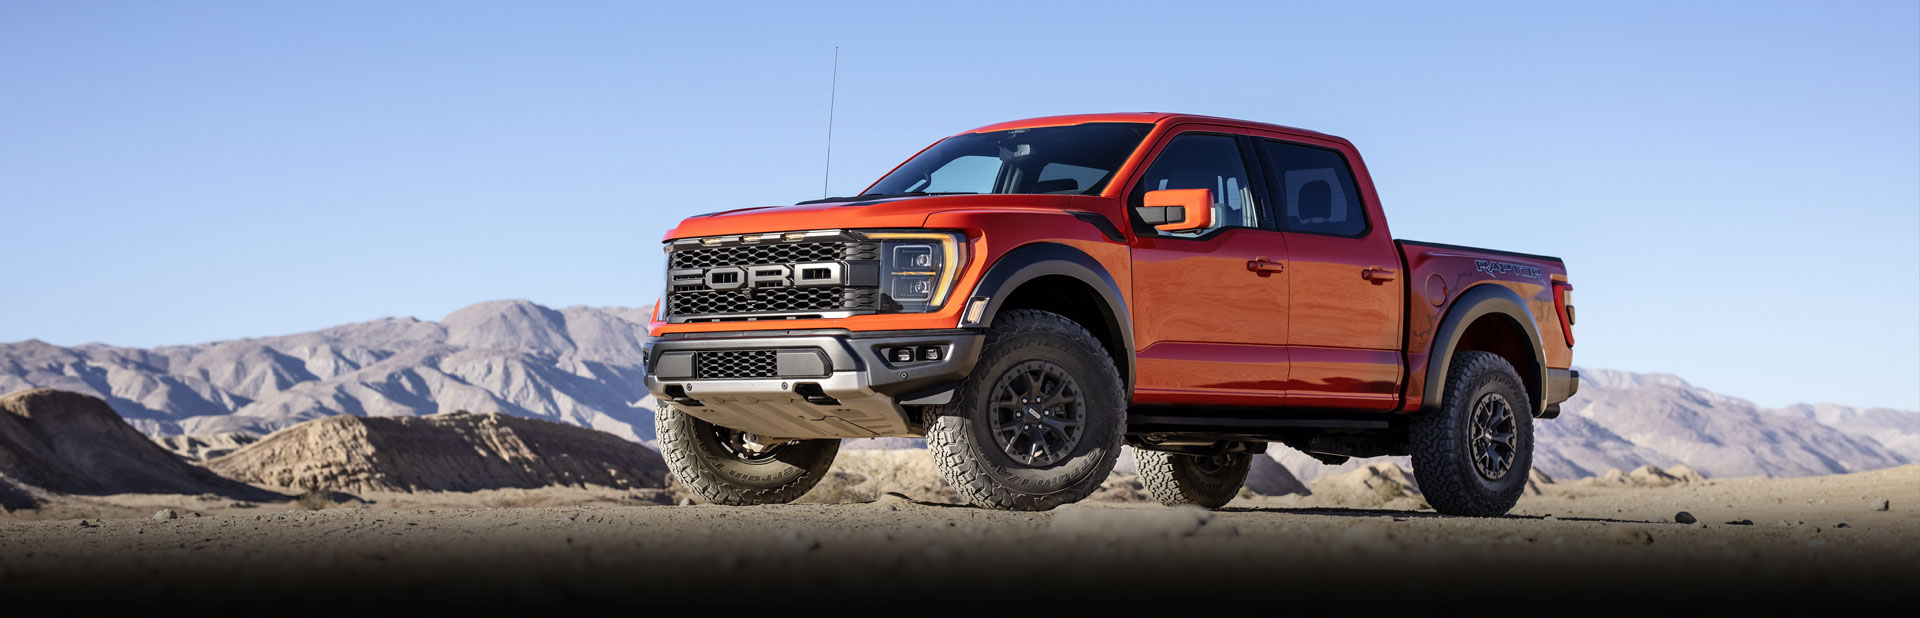 https://www.americancarcity.fr/wp-content/acc/images/best-sellers/ford/ford-raptor.jpg